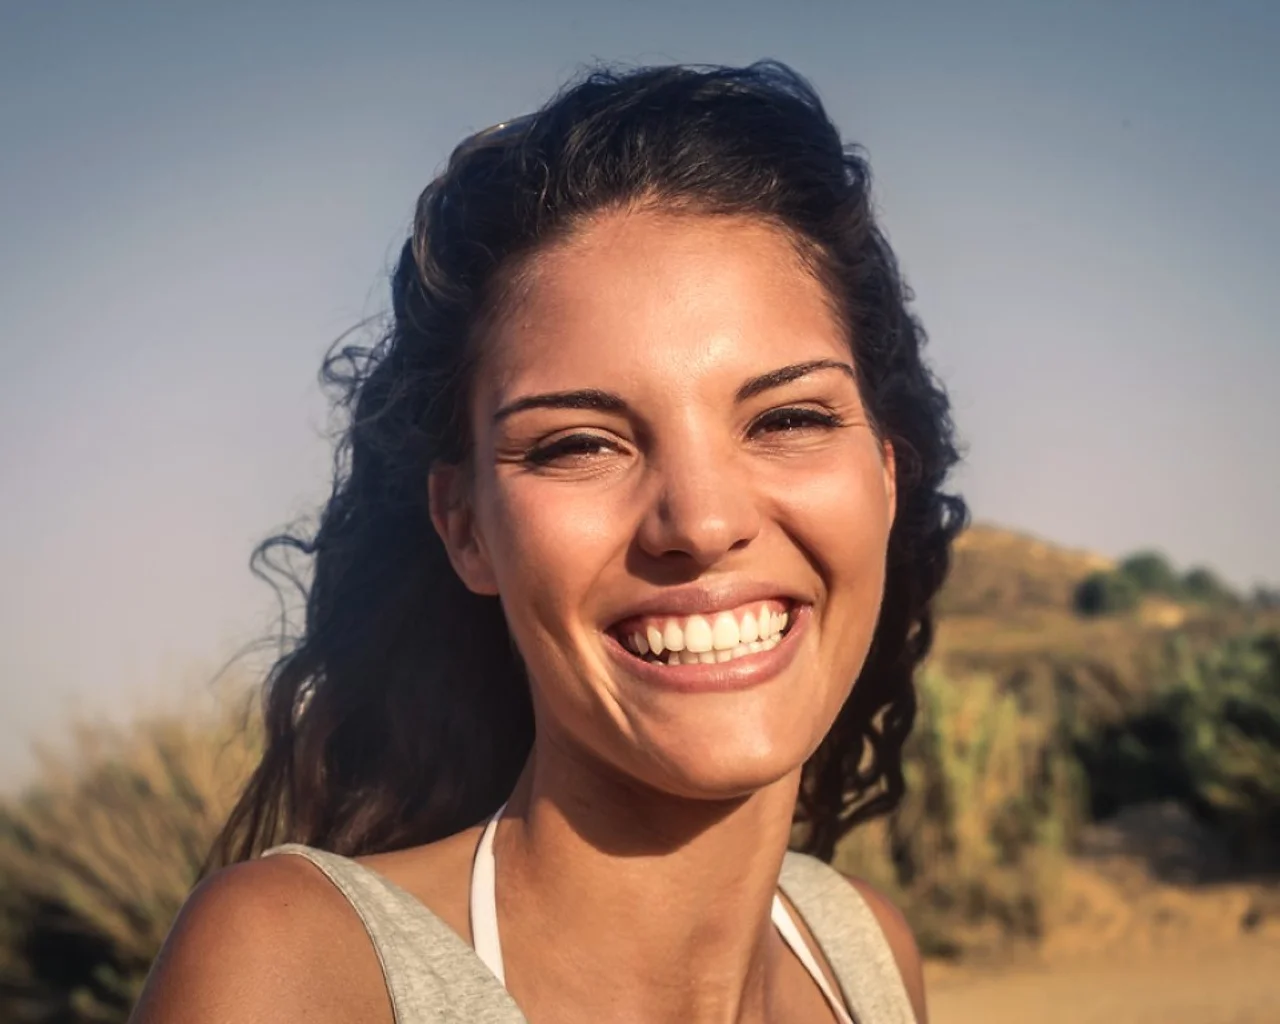 Woman smiling on a sunny day